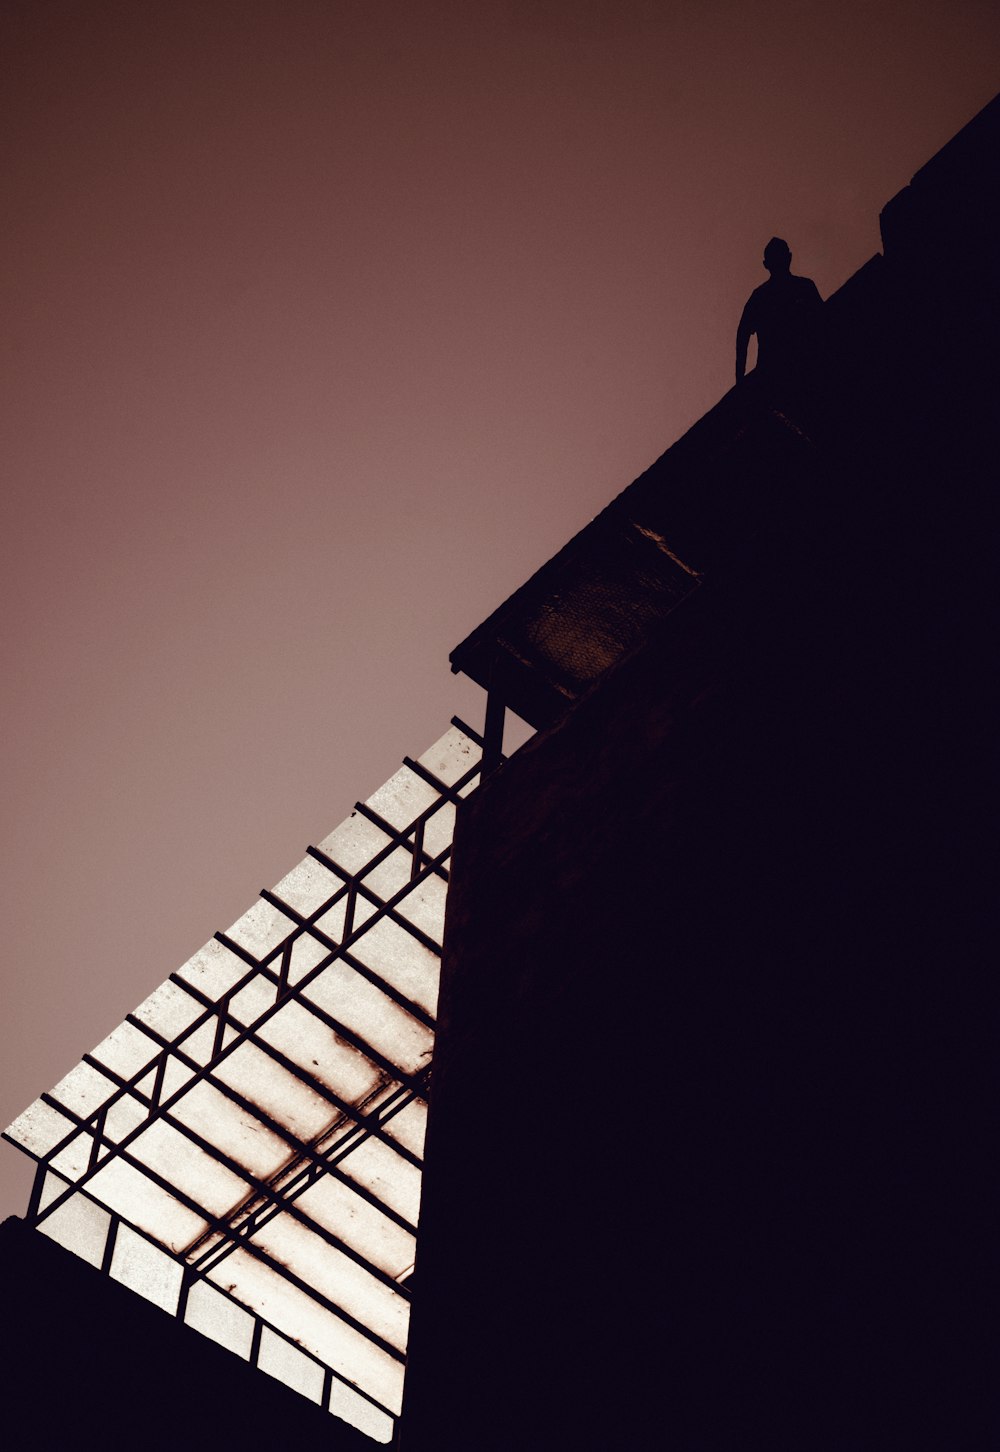 silhouette of man standing on top of building